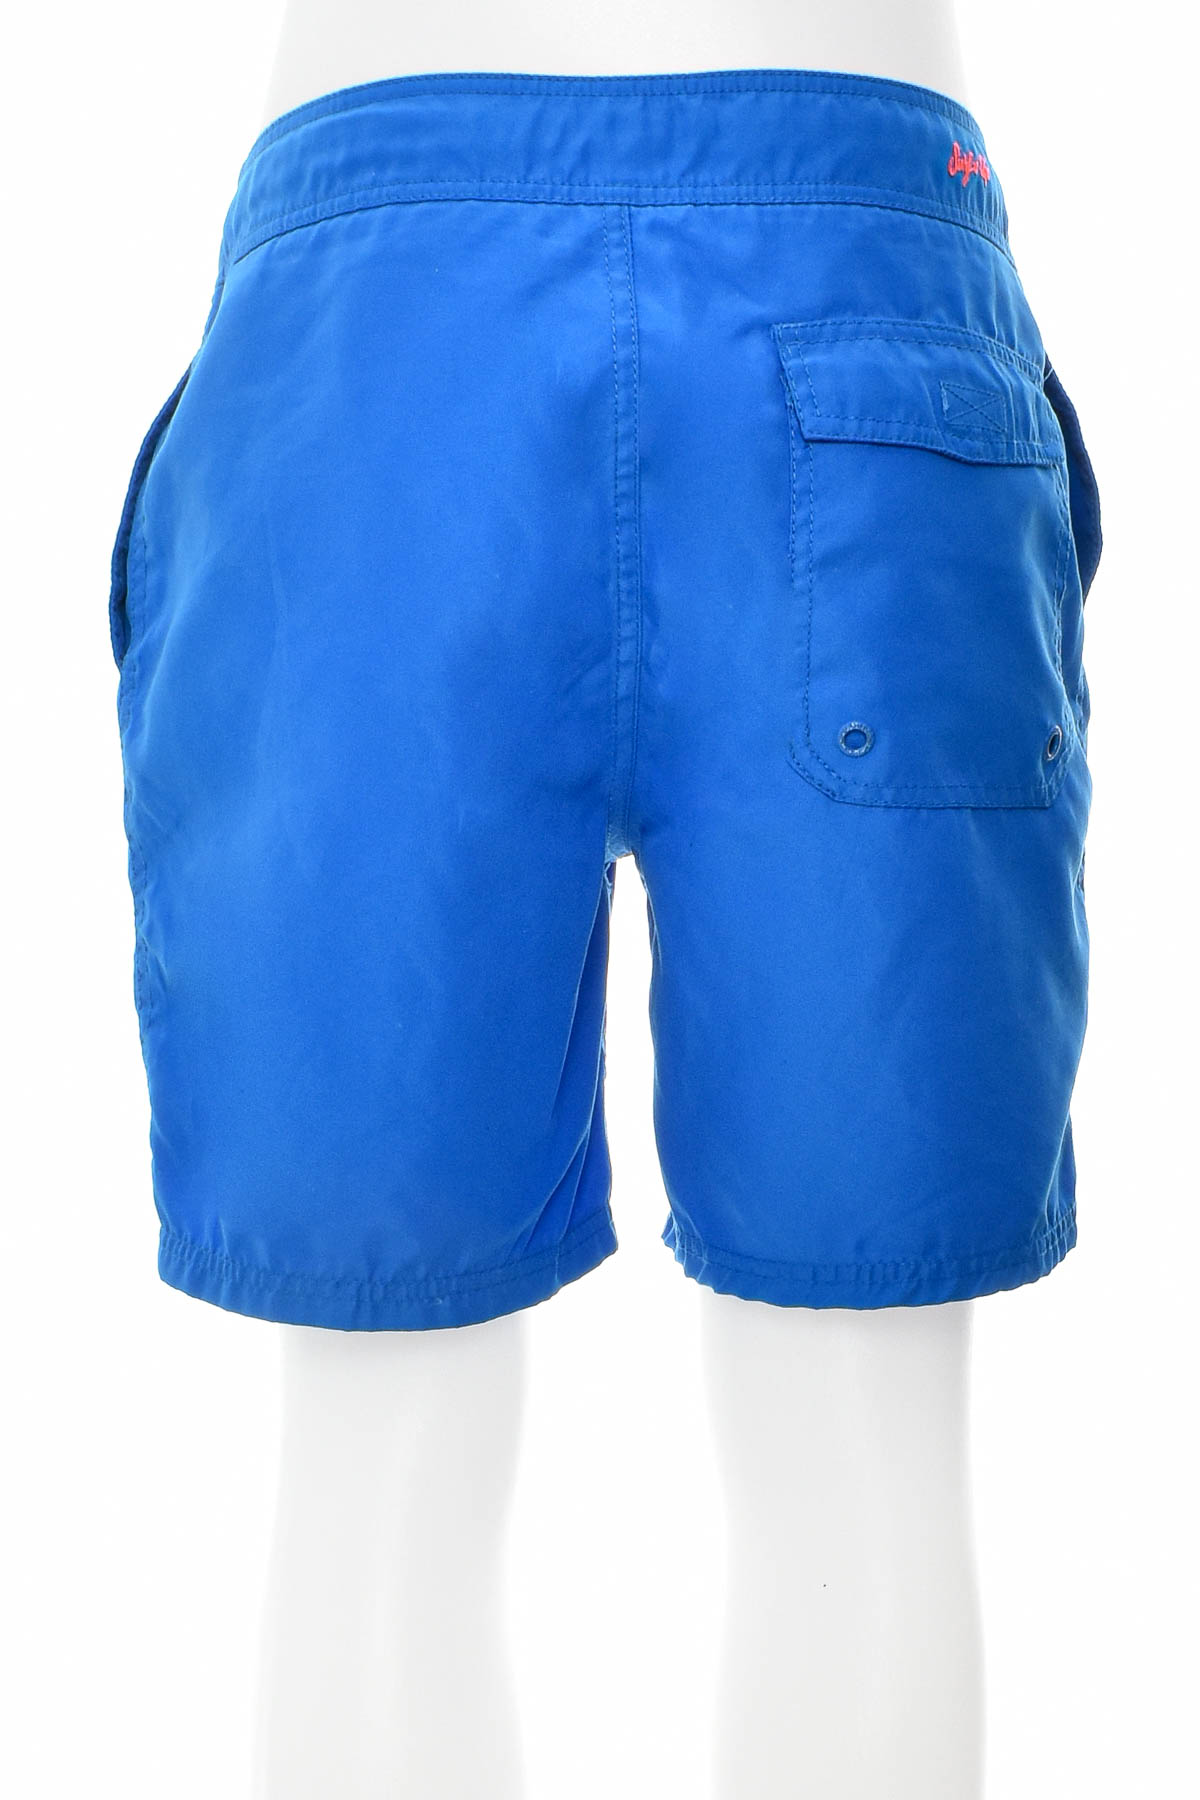 Men's shorts - 55 Stage - 1